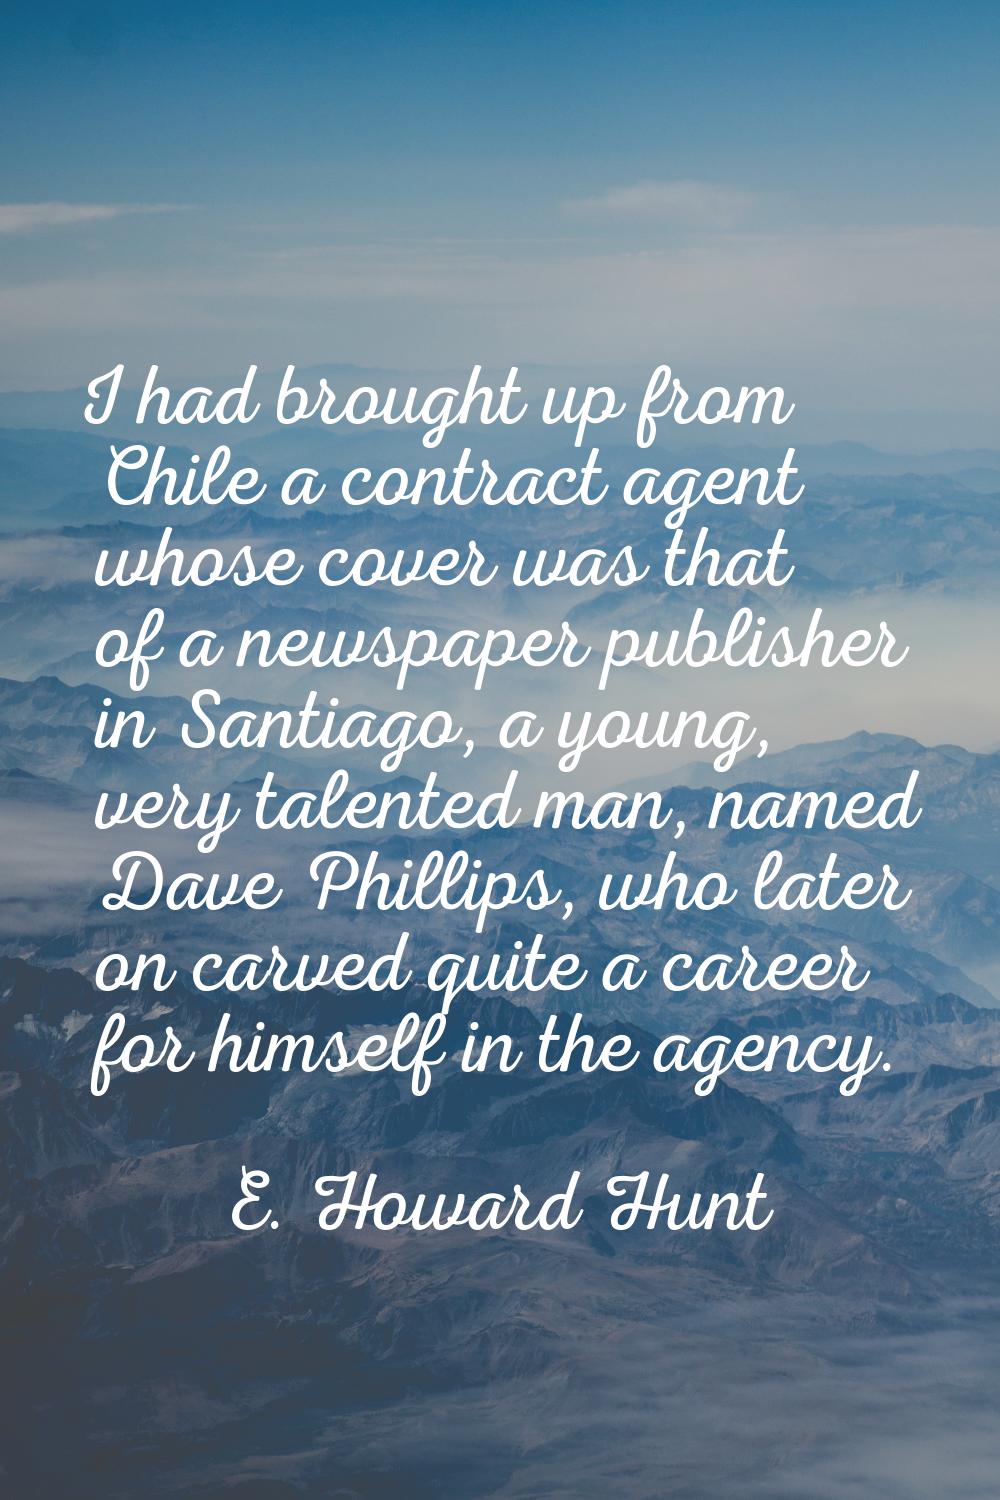 I had brought up from Chile a contract agent whose cover was that of a newspaper publisher in Santi